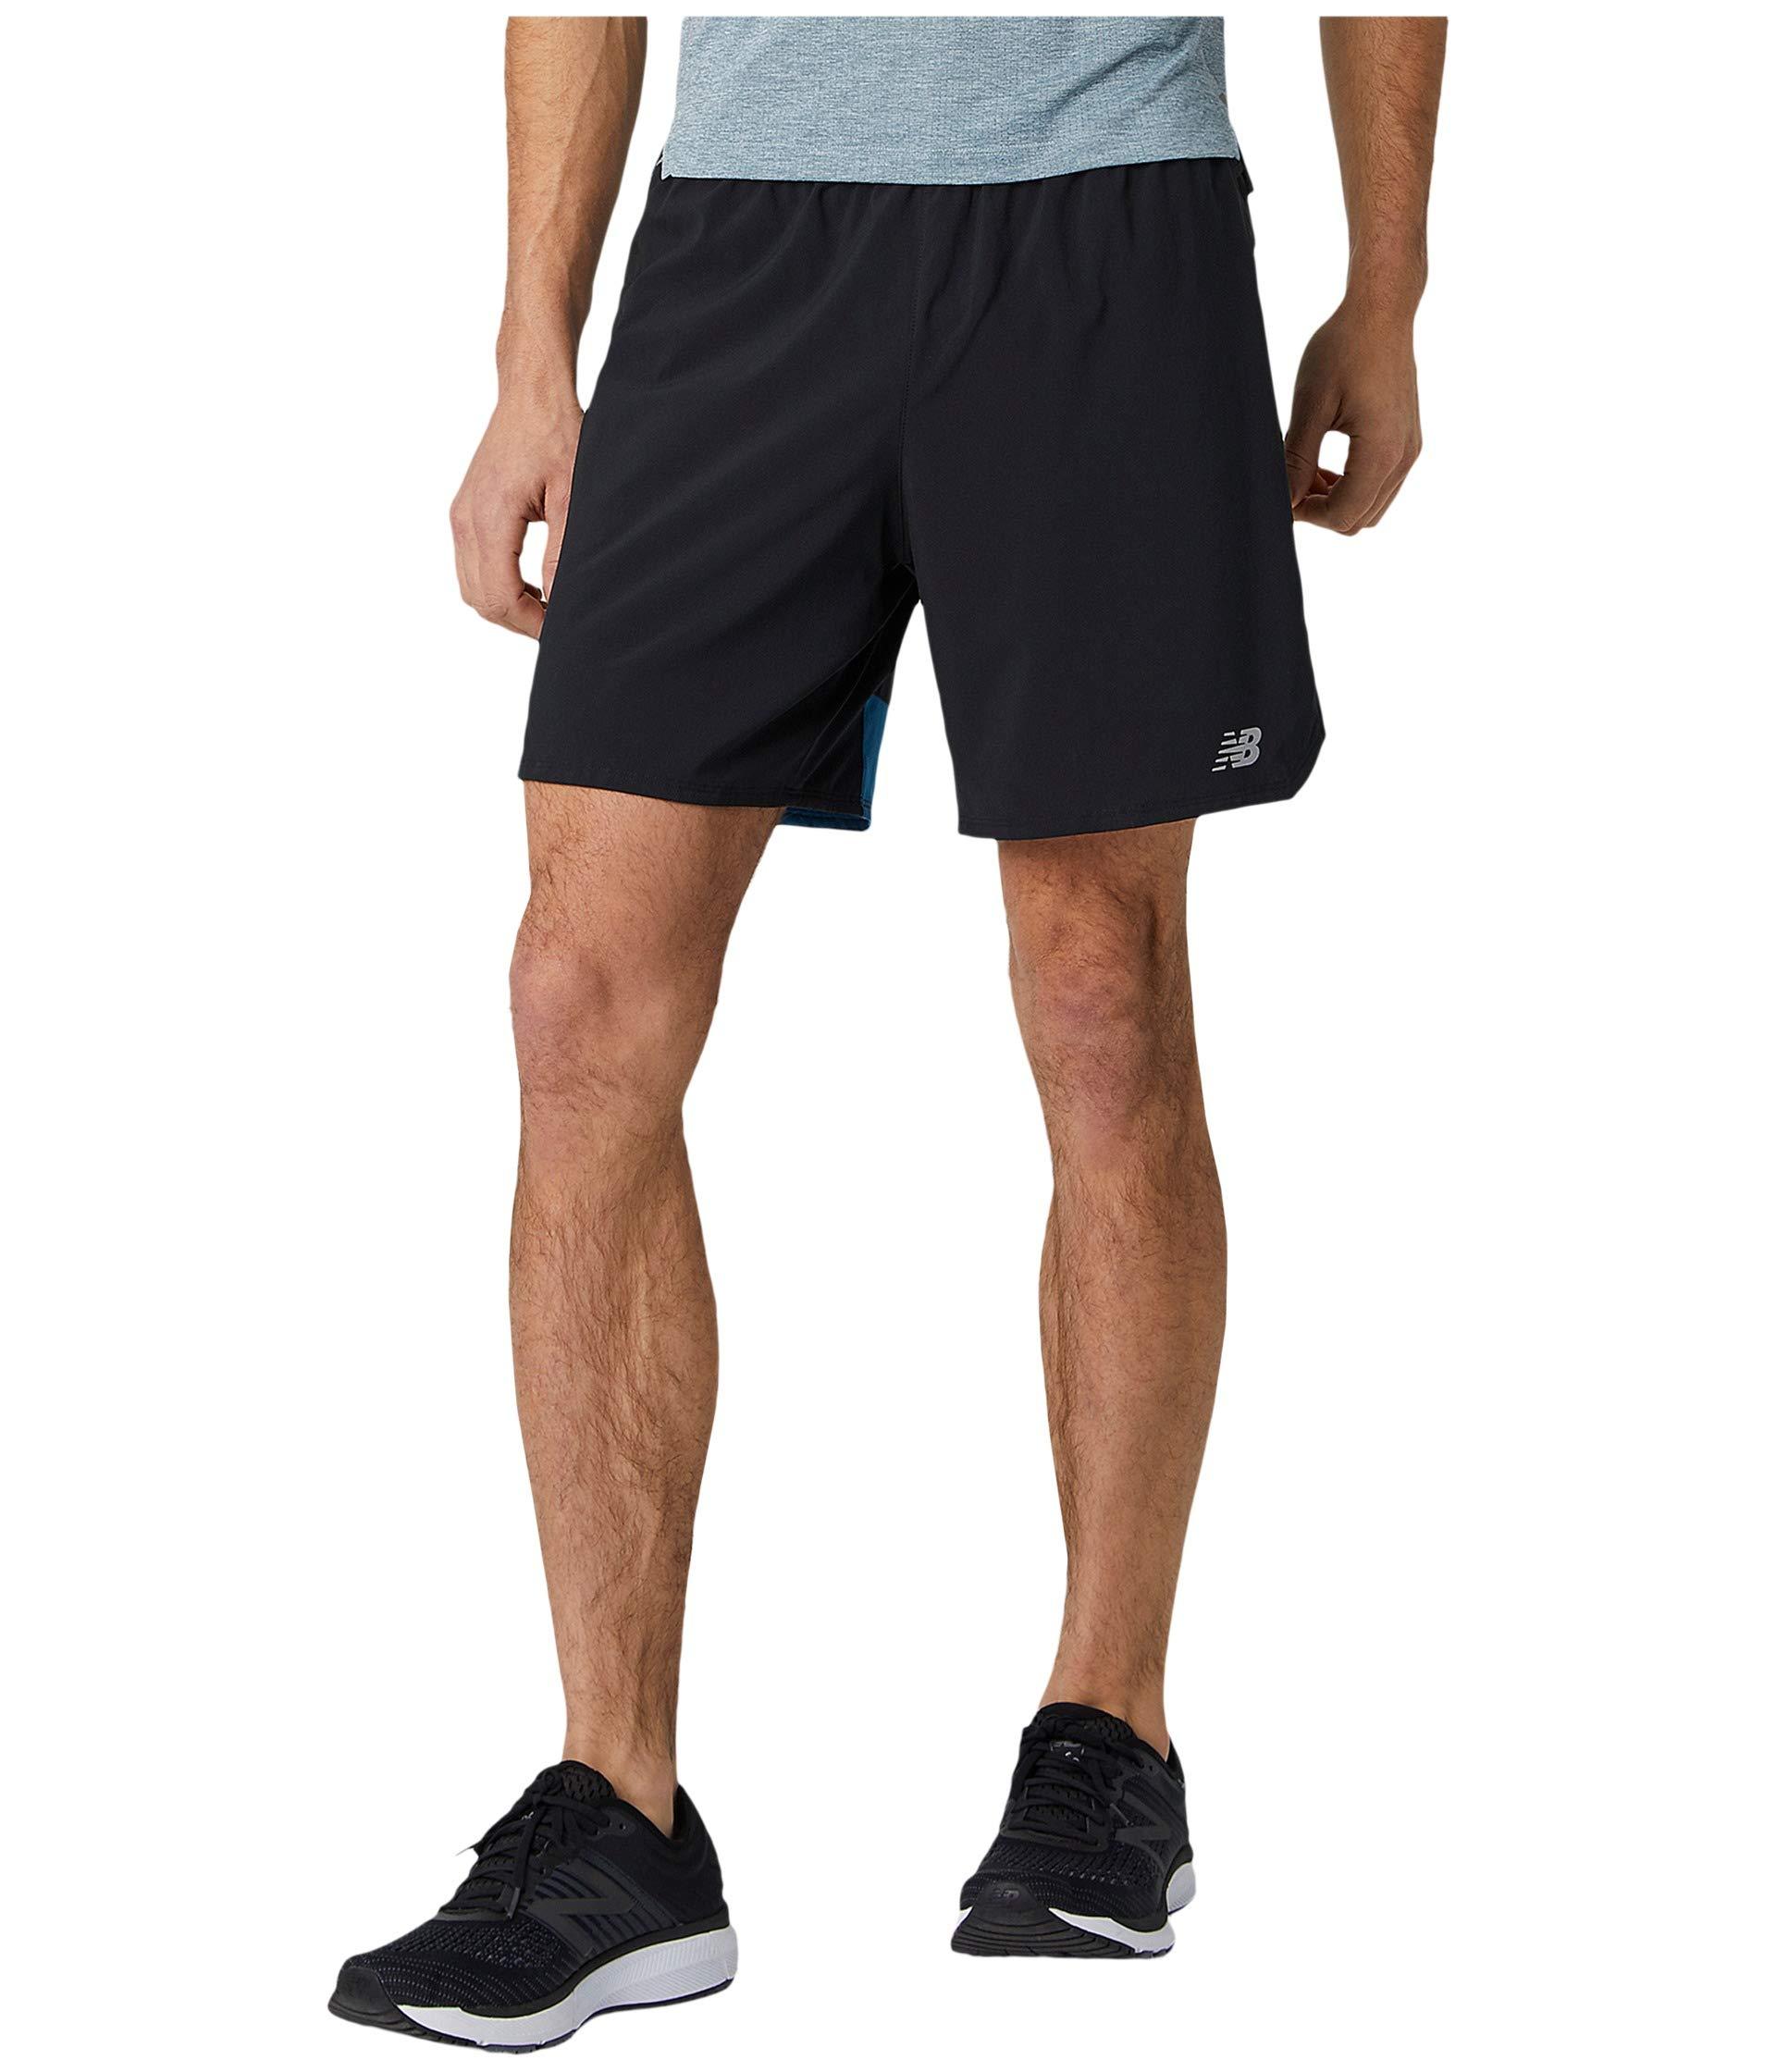 New Balance Synthetic Impact Run 7-inch Shorts in Blue for Men - Lyst